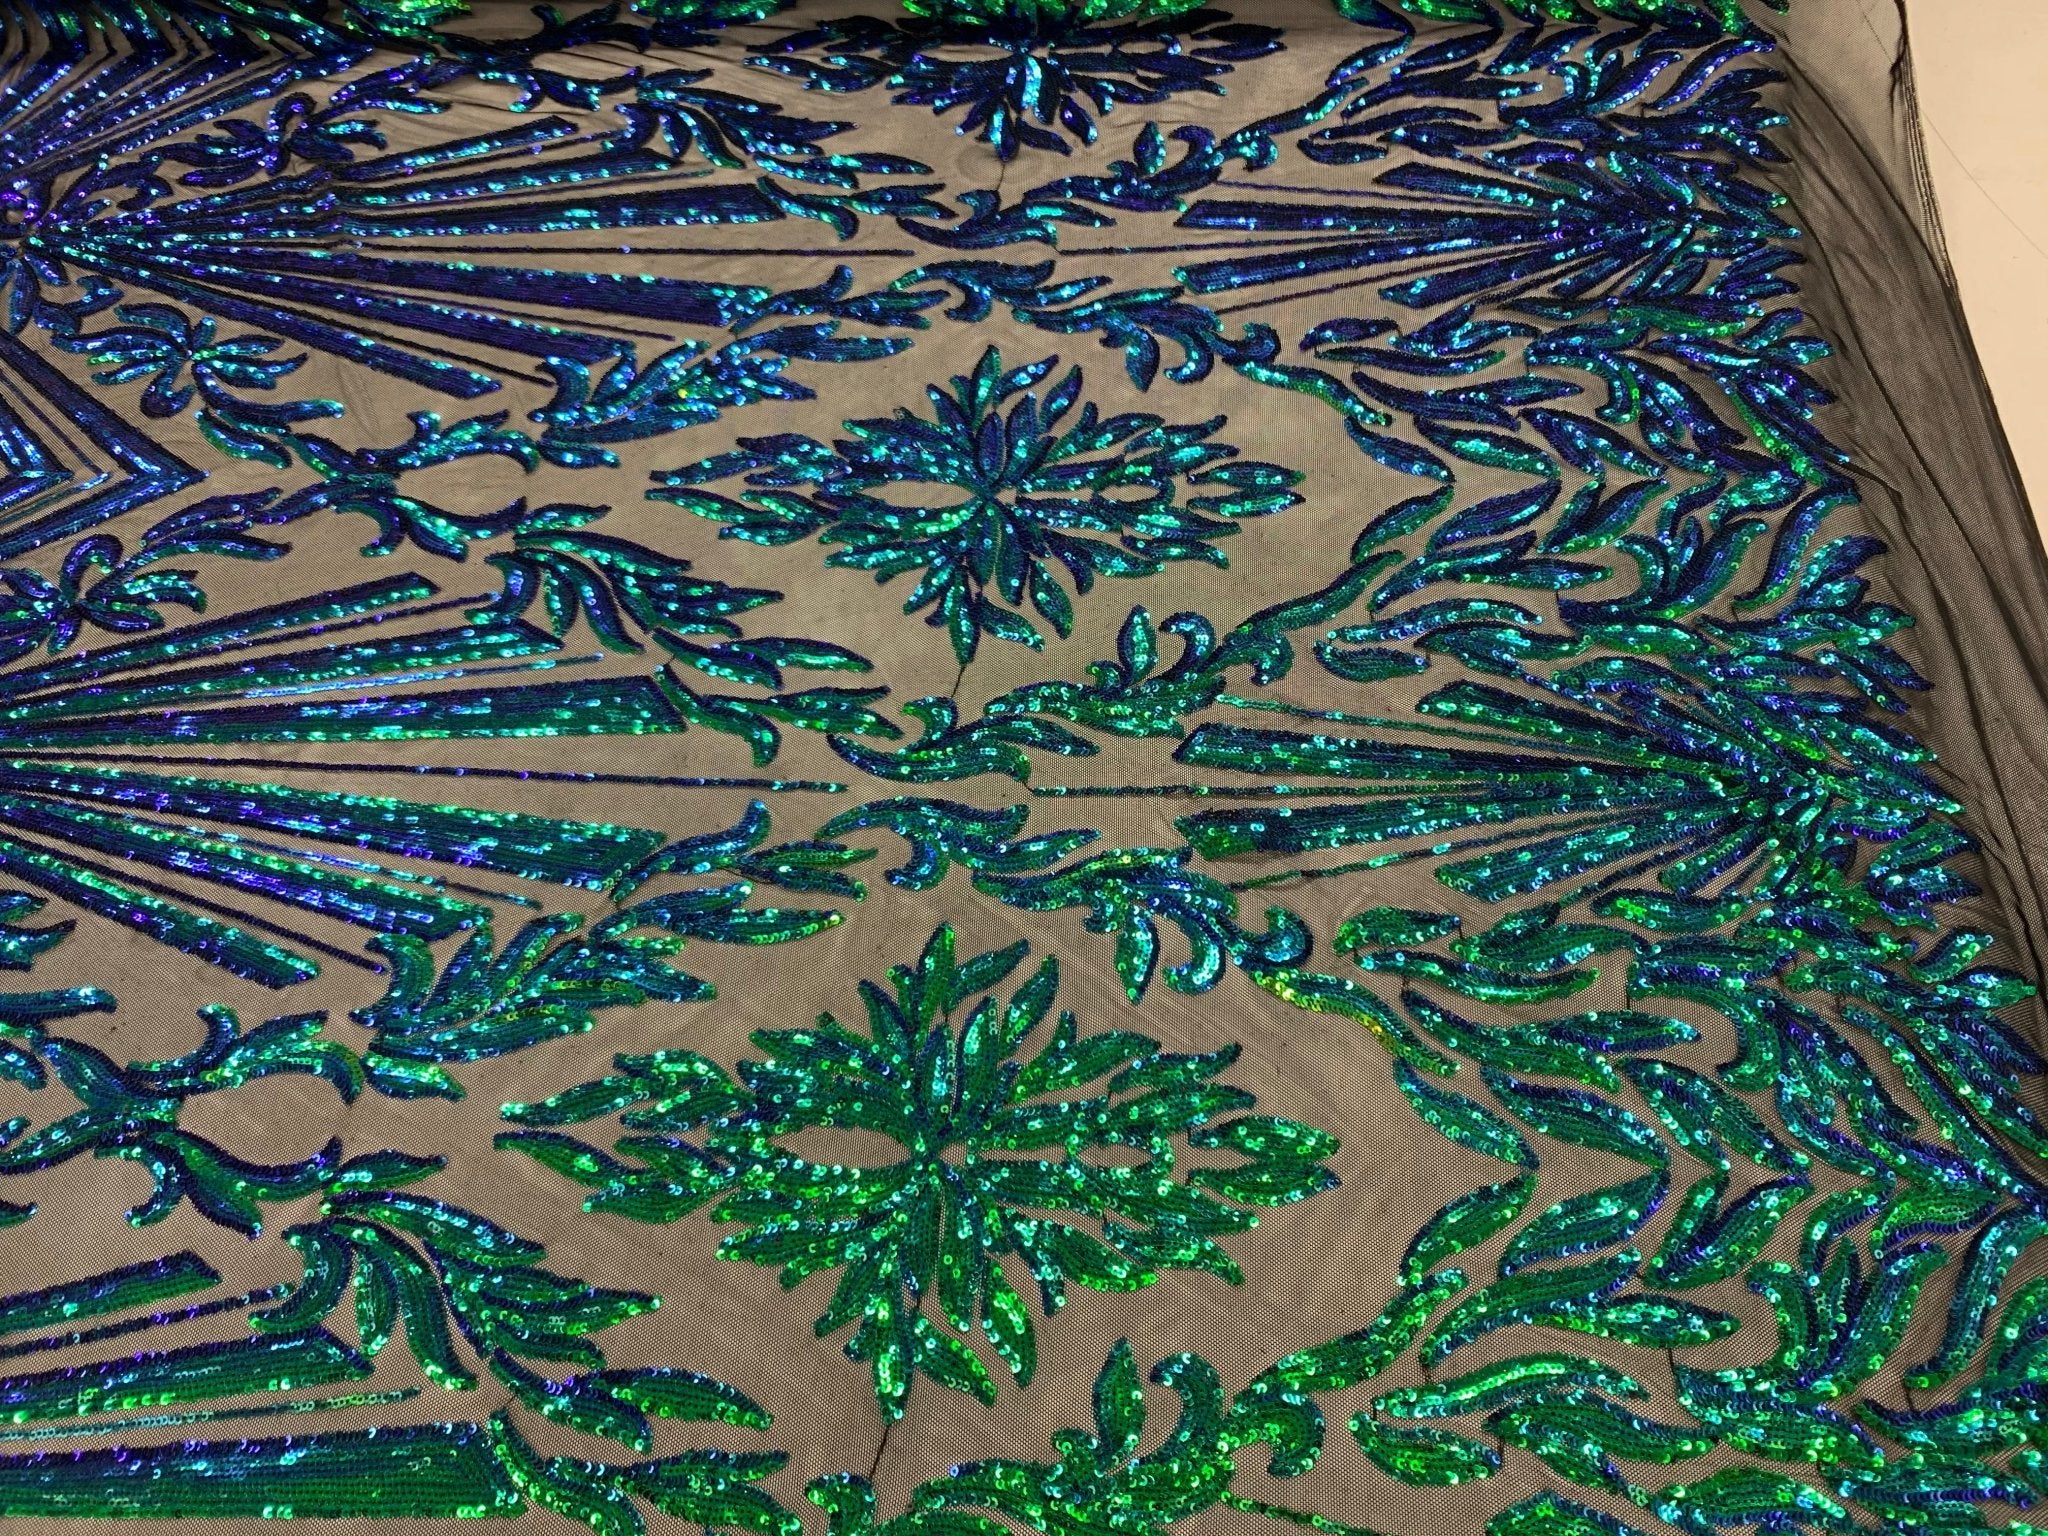 French Embroidery Stretch Sequins Fabric By The Yard on a Mesh LaceICEFABRICICE FABRICSIridescent GreenFrench Embroidery Stretch Sequins Fabric By The Yard on a Mesh Lace ICEFABRIC Iridescent Green